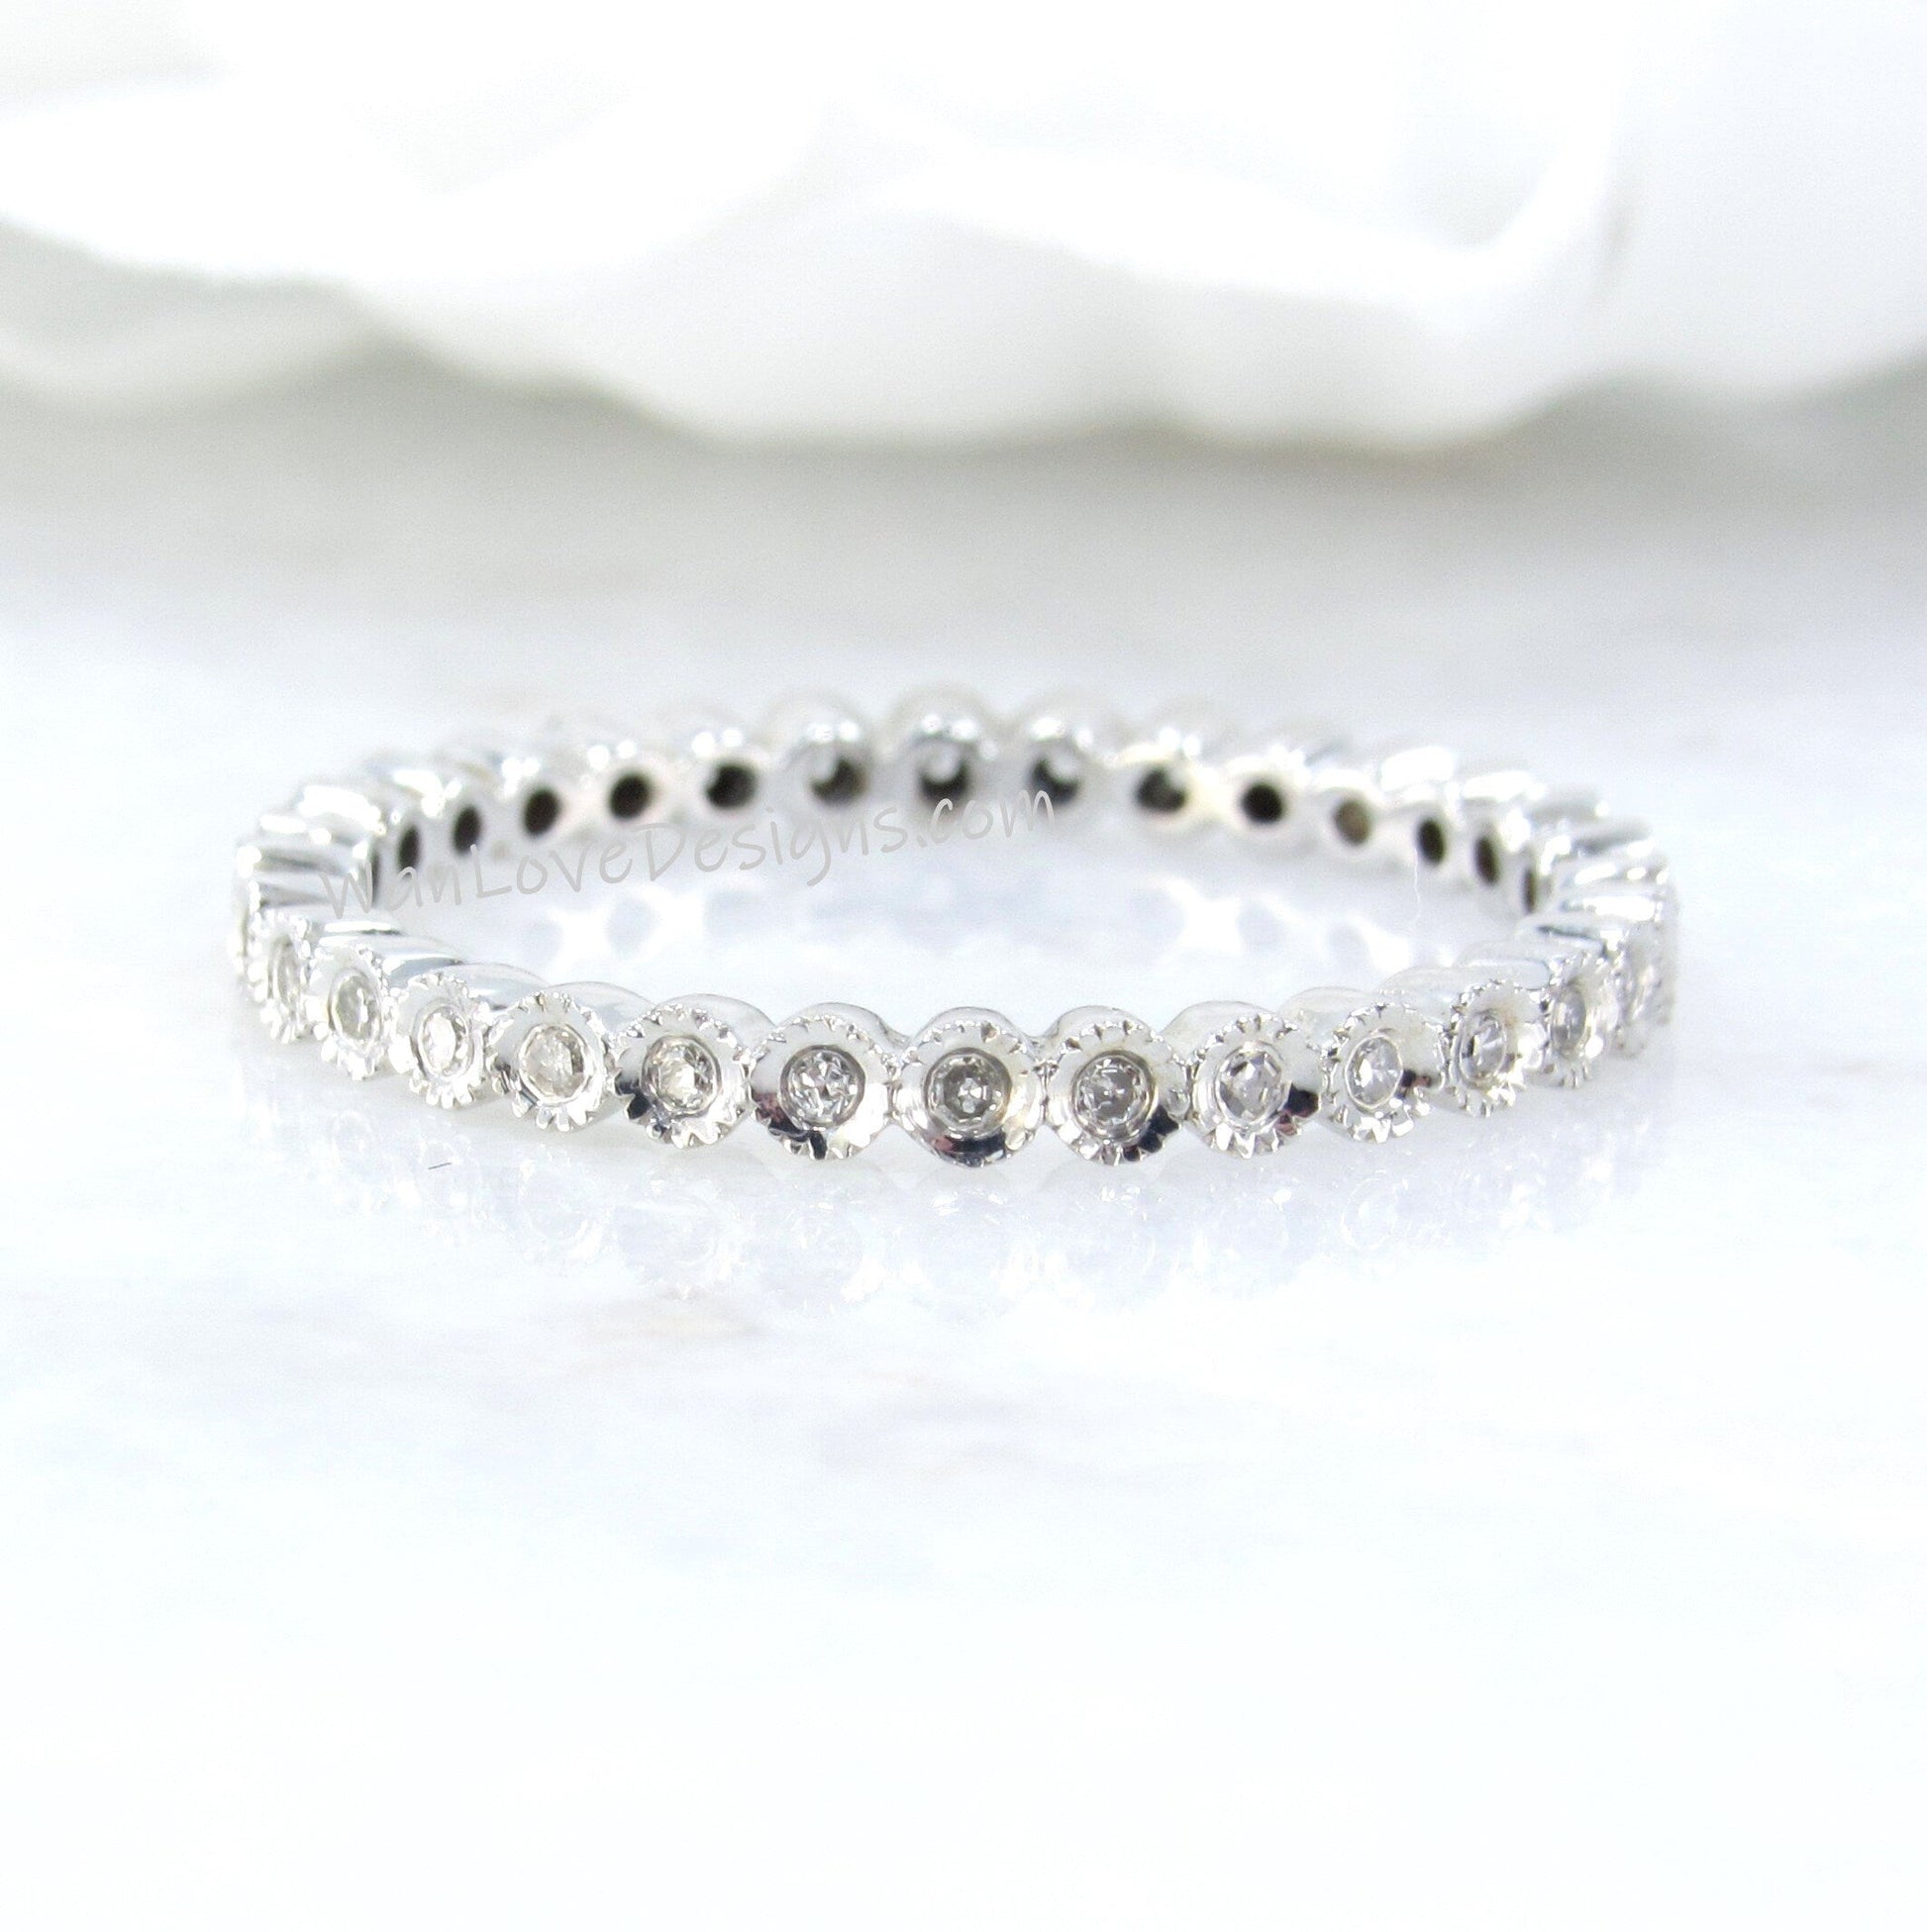 Milgrain Bezel Infinity diamond wedding band white gold full eternity band unique bridal bubble ring dainty stacking matching promise ring Wan Love Designs